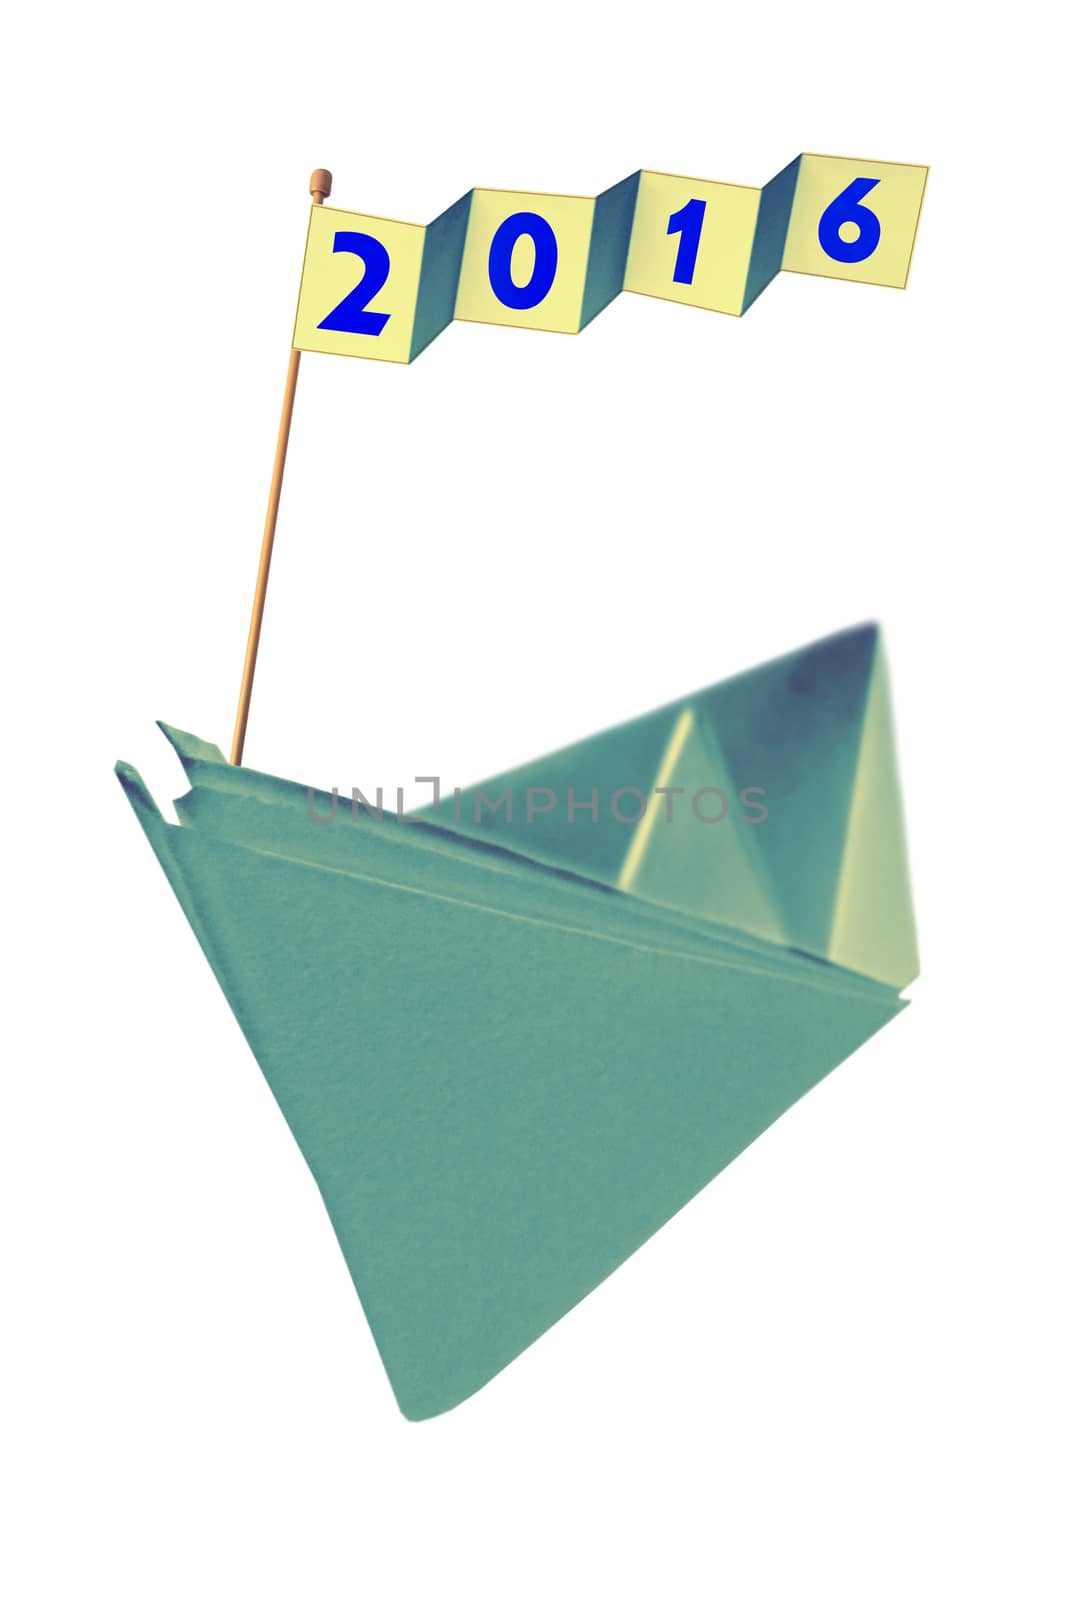 Origami paper boat with flag writing 2016 by yands